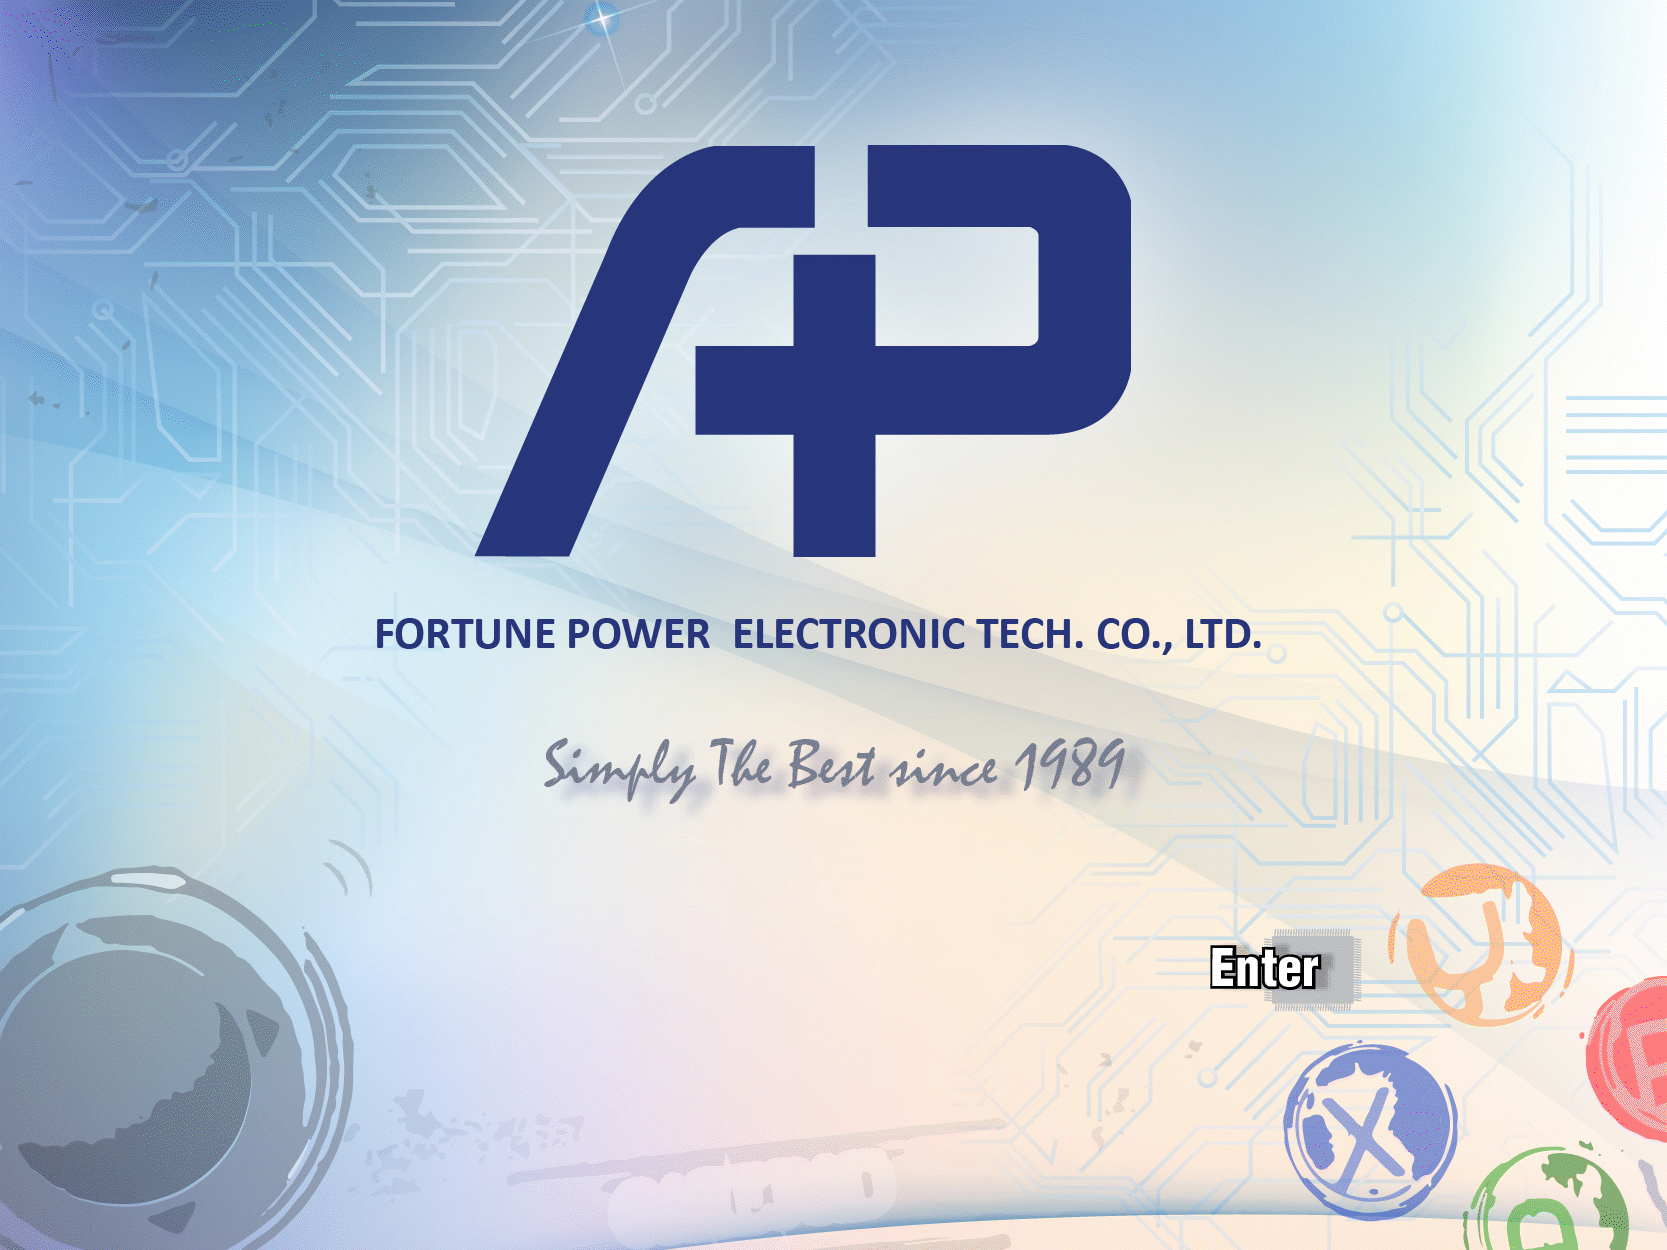 WELCOME TO "FORTUNE POWER ELECTRONIC TECHNOLOGY CO., LTD"